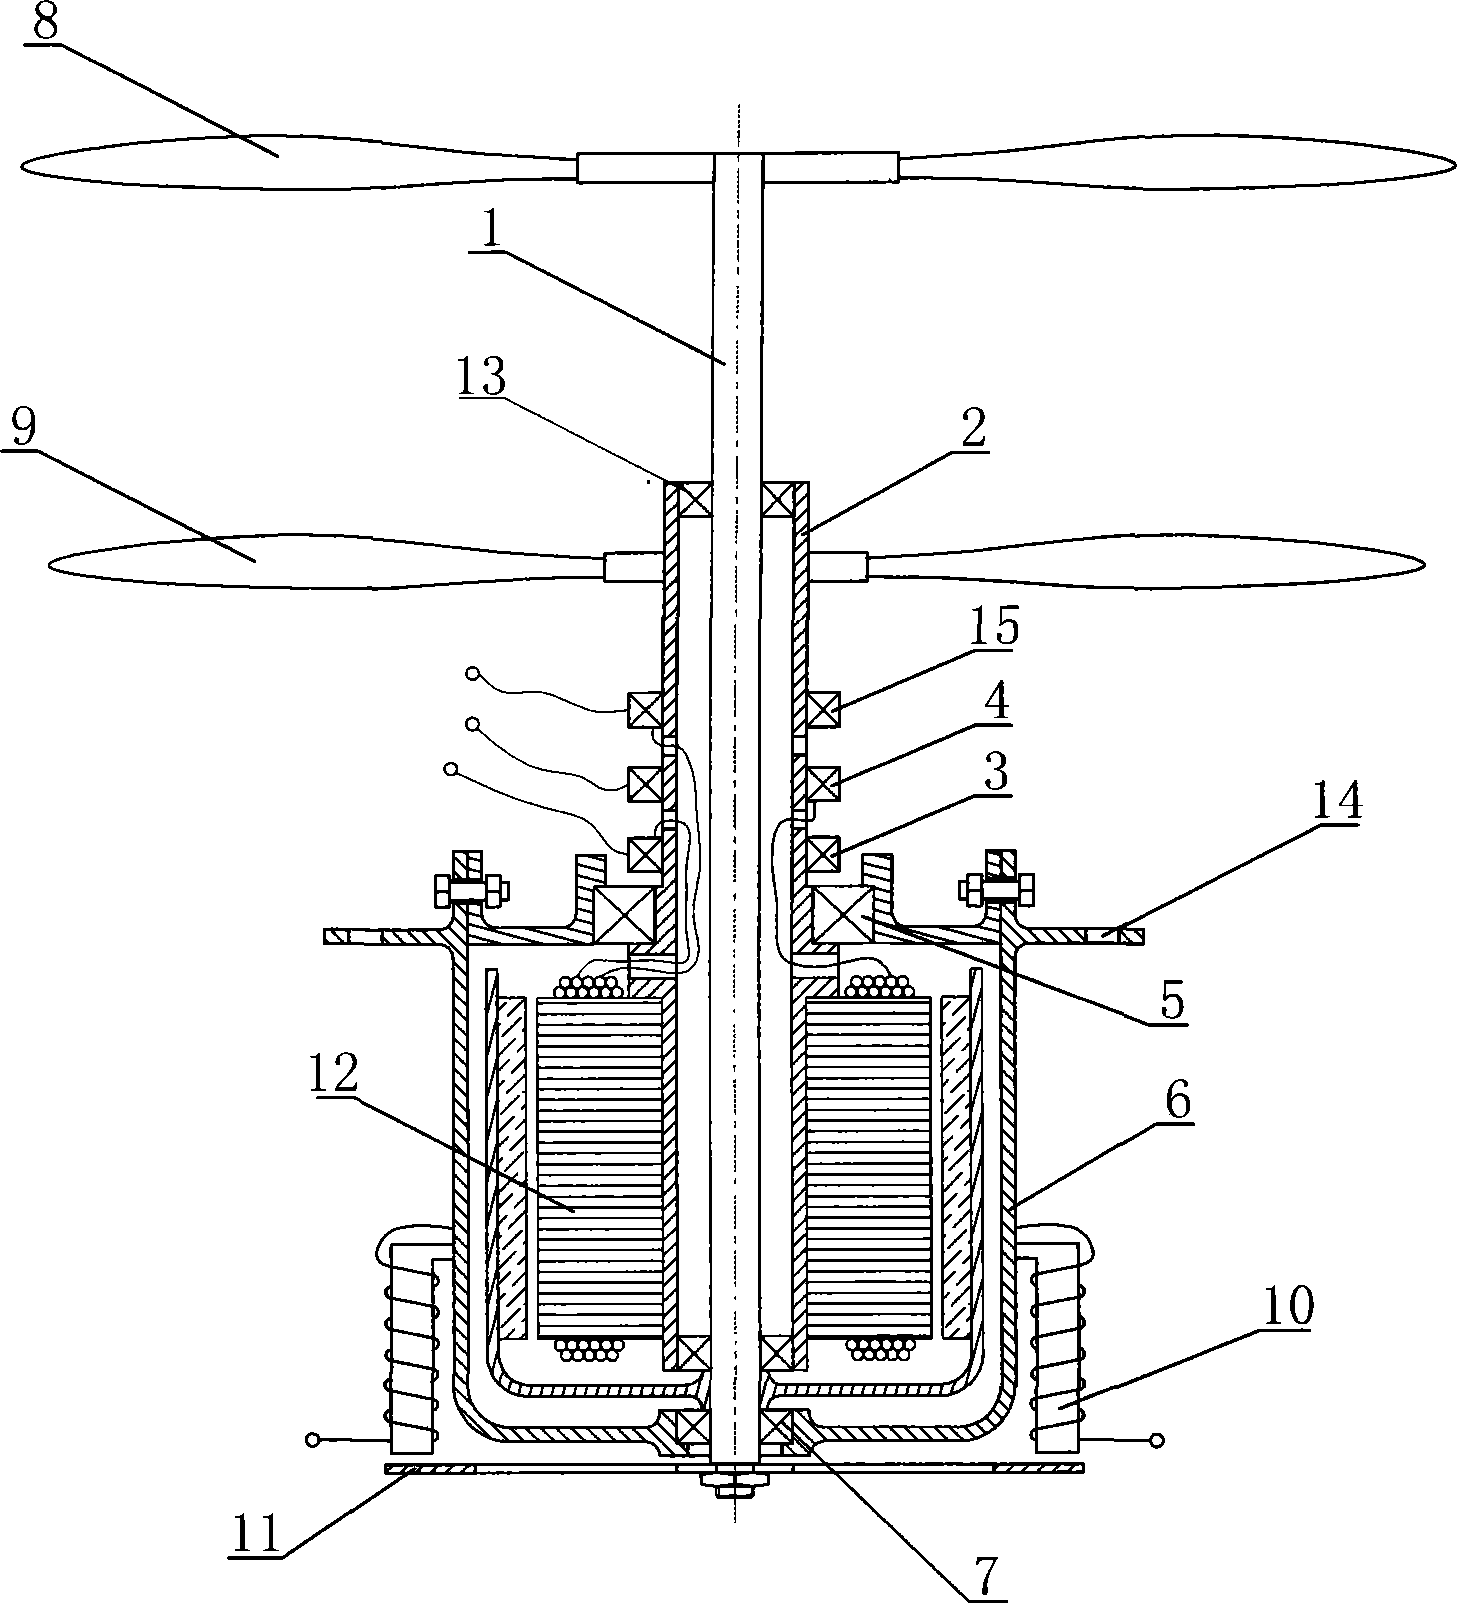 Power-driven system of aerial vehicle